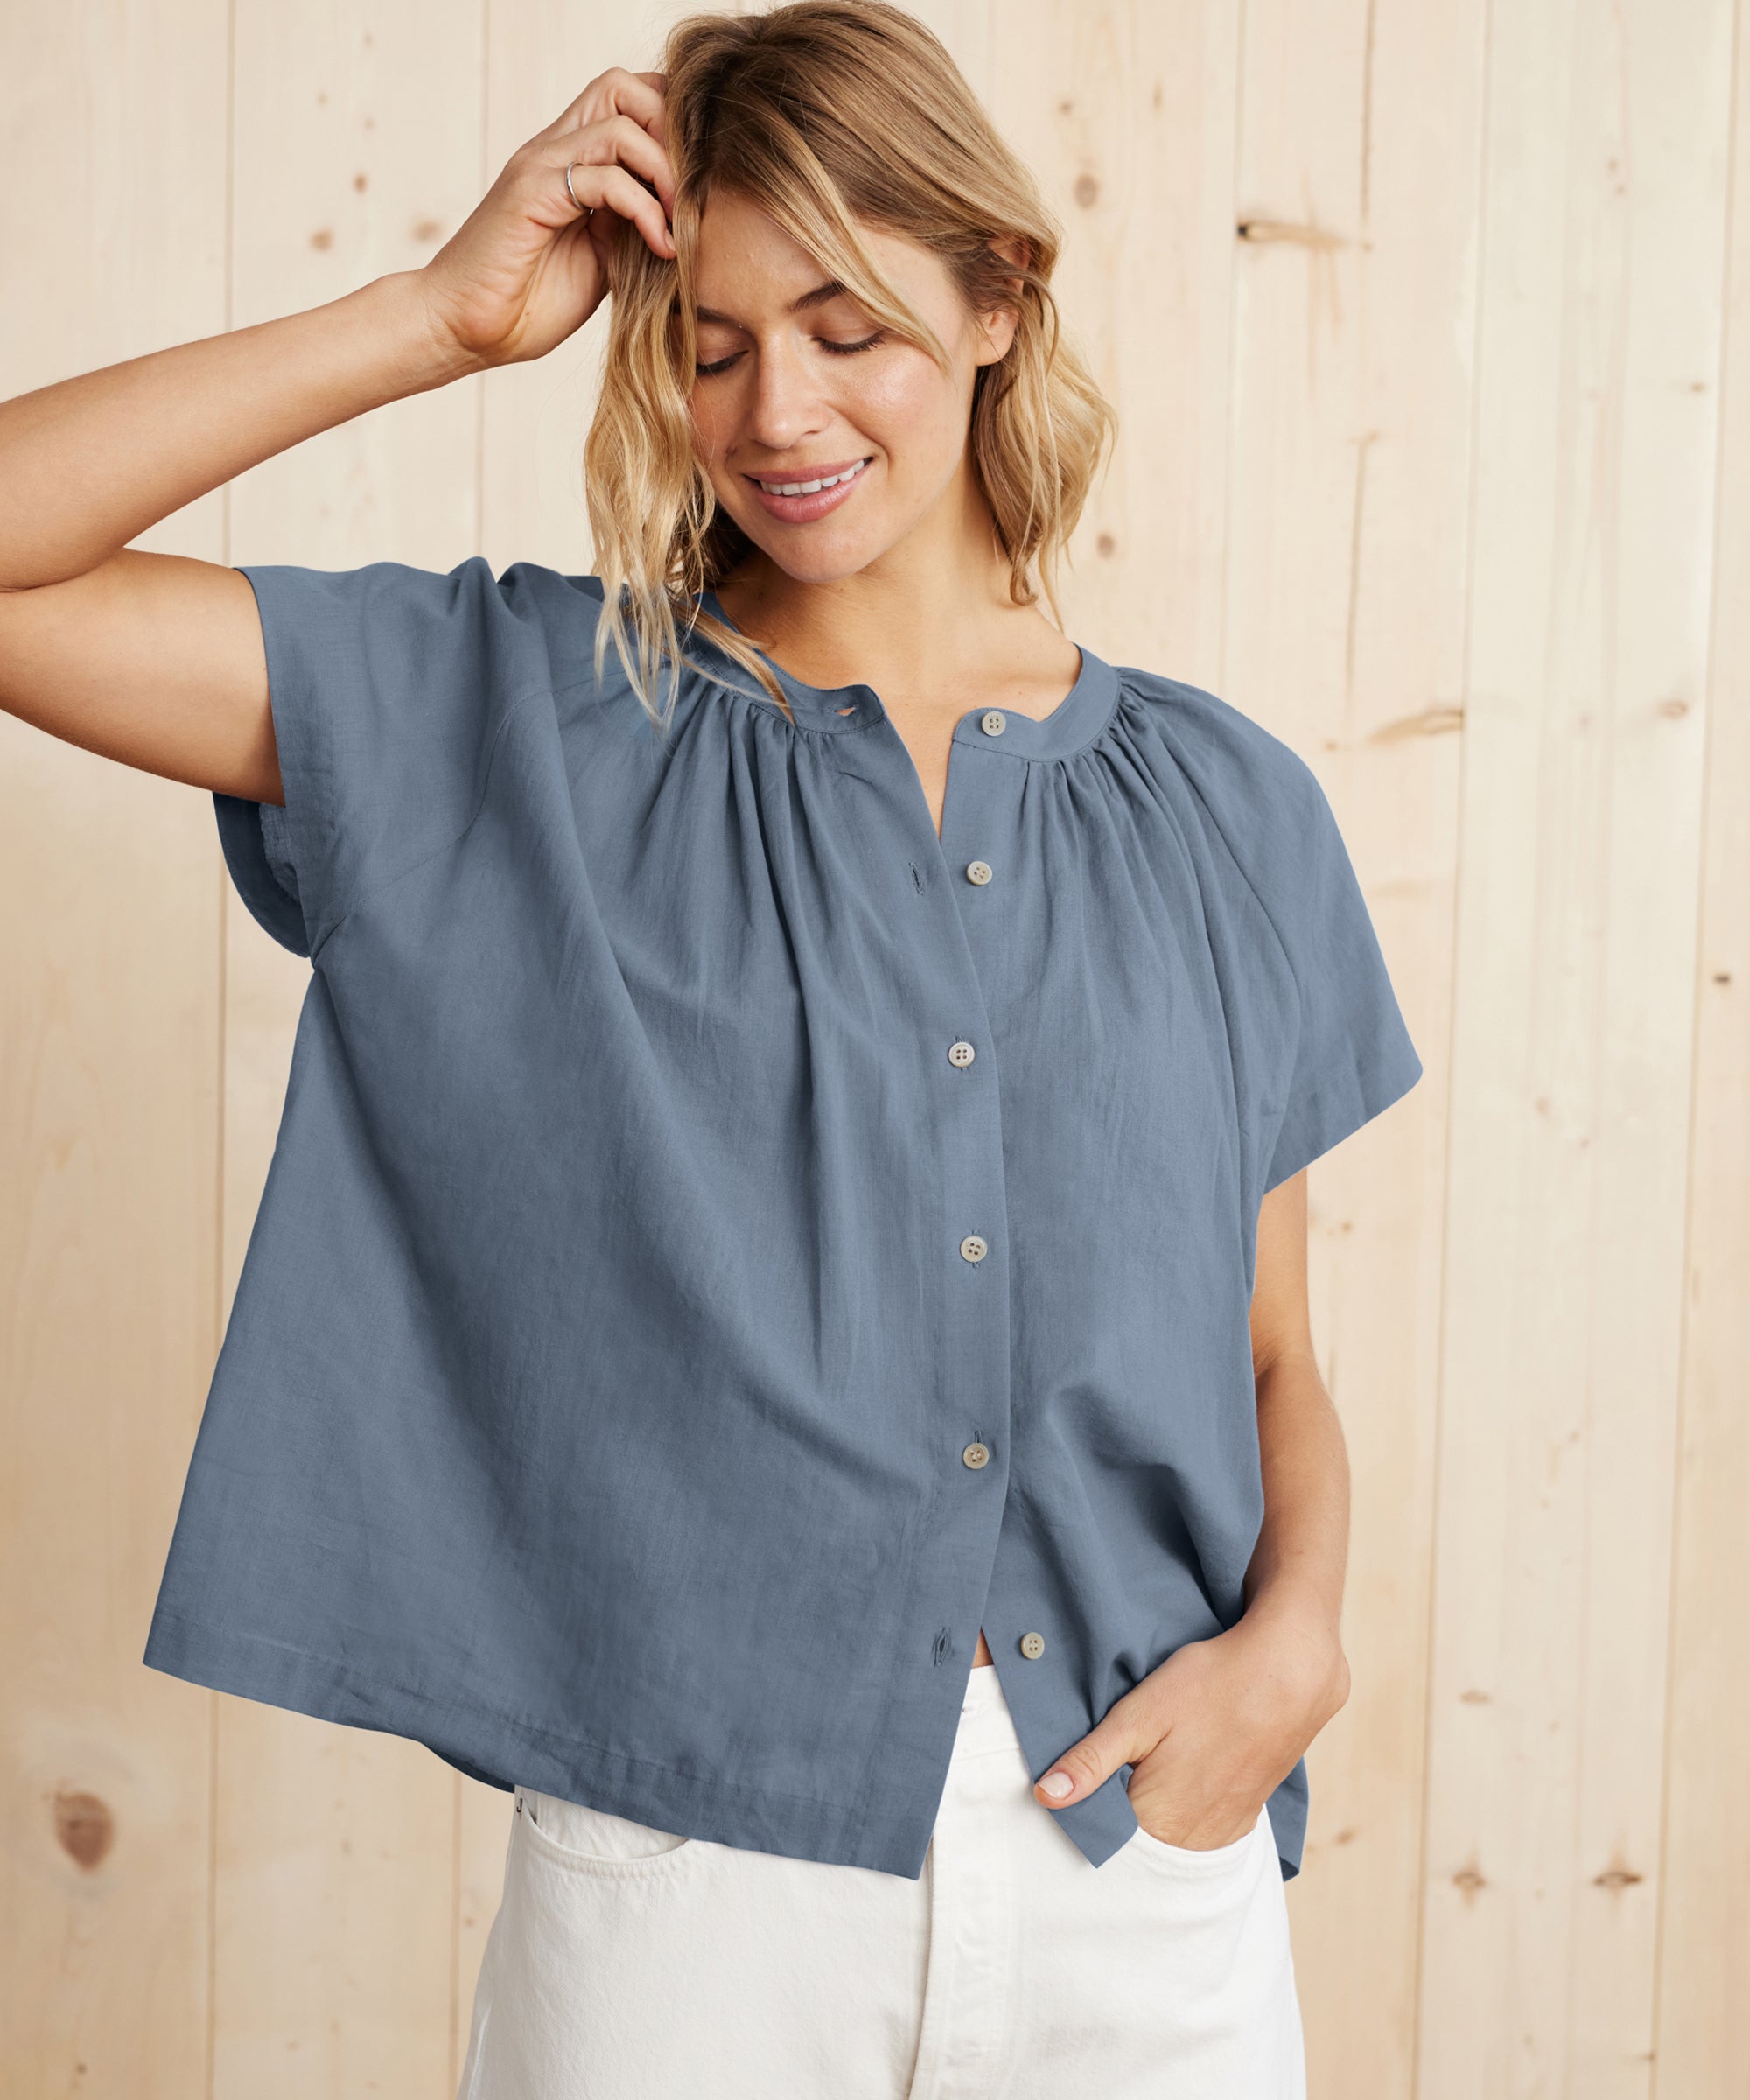 Willow & Root Floral Chiffon Top - Women's Shirts/Blouses in Blue Grey